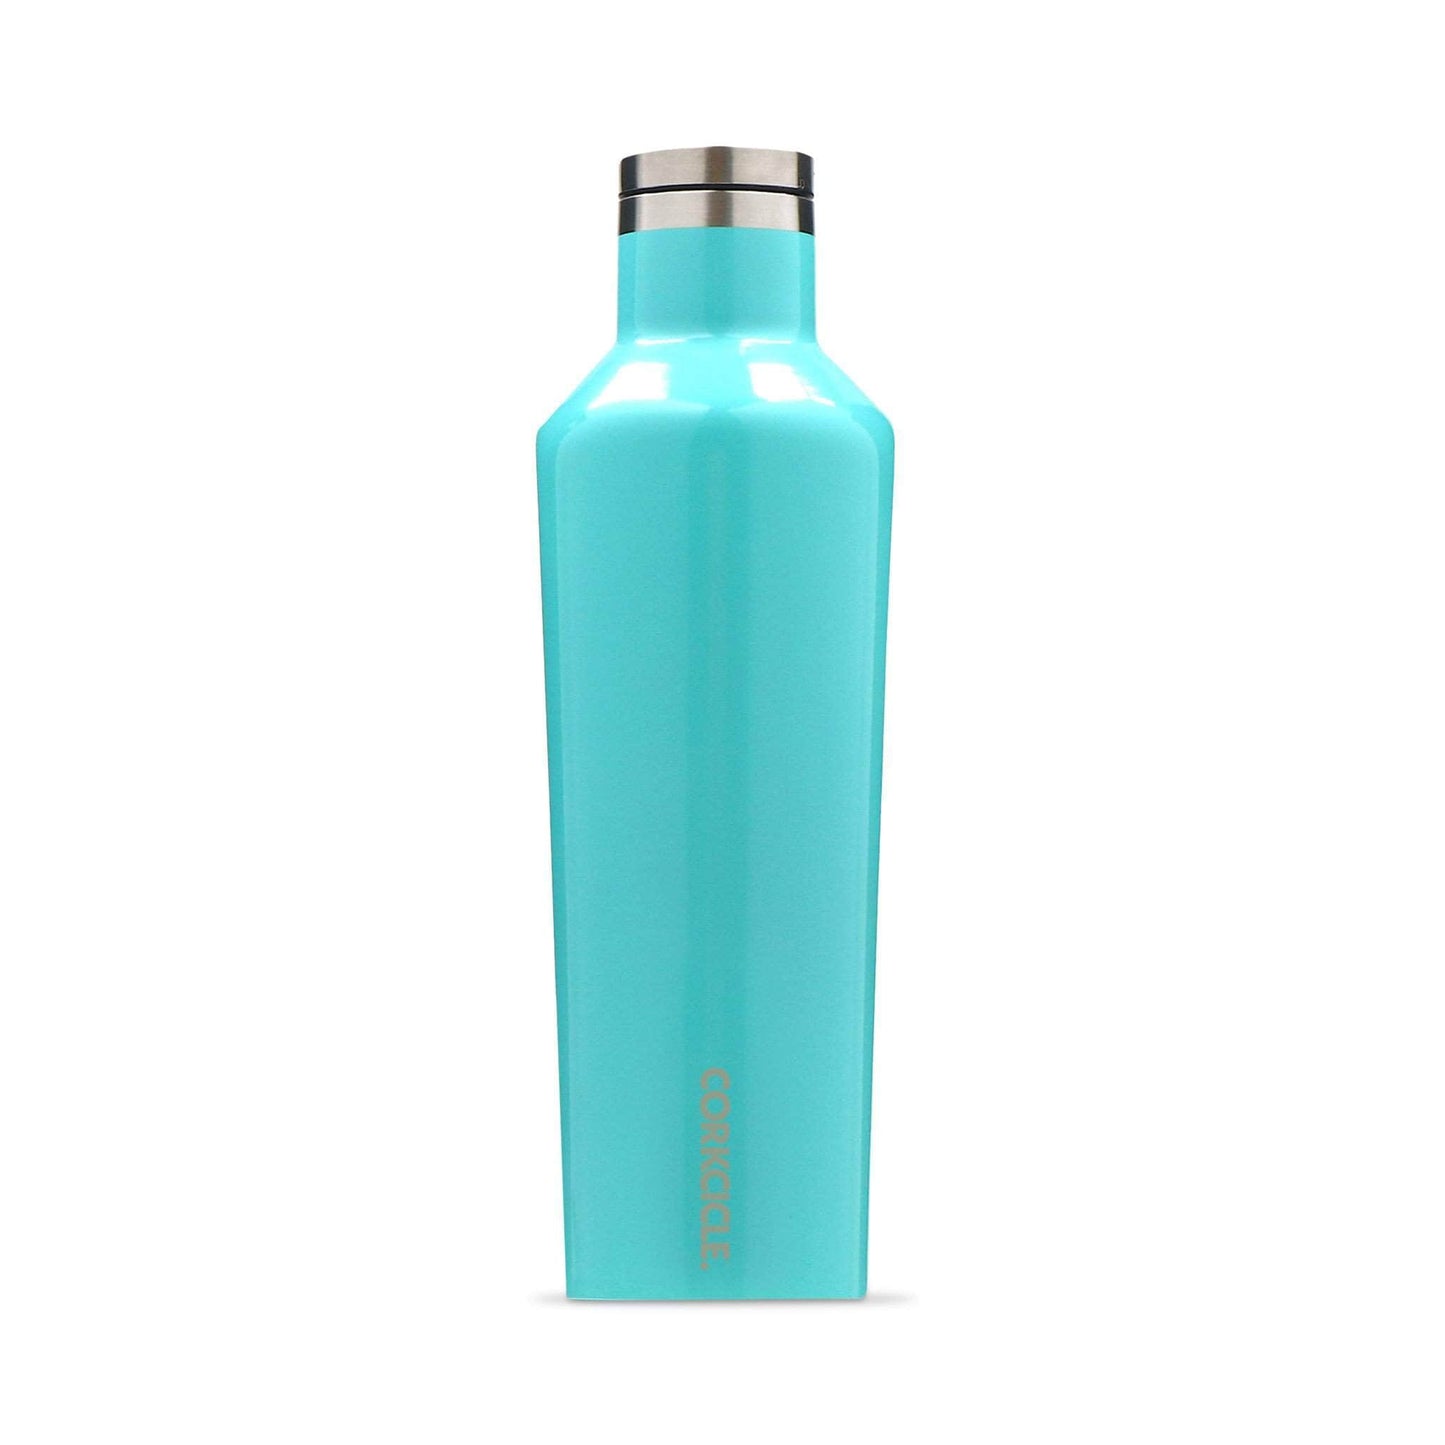 Corkcicle Water Bottles Corkcicle Canteen - Insul. Bottle - 16oz/475ml - Gloss Turquoise